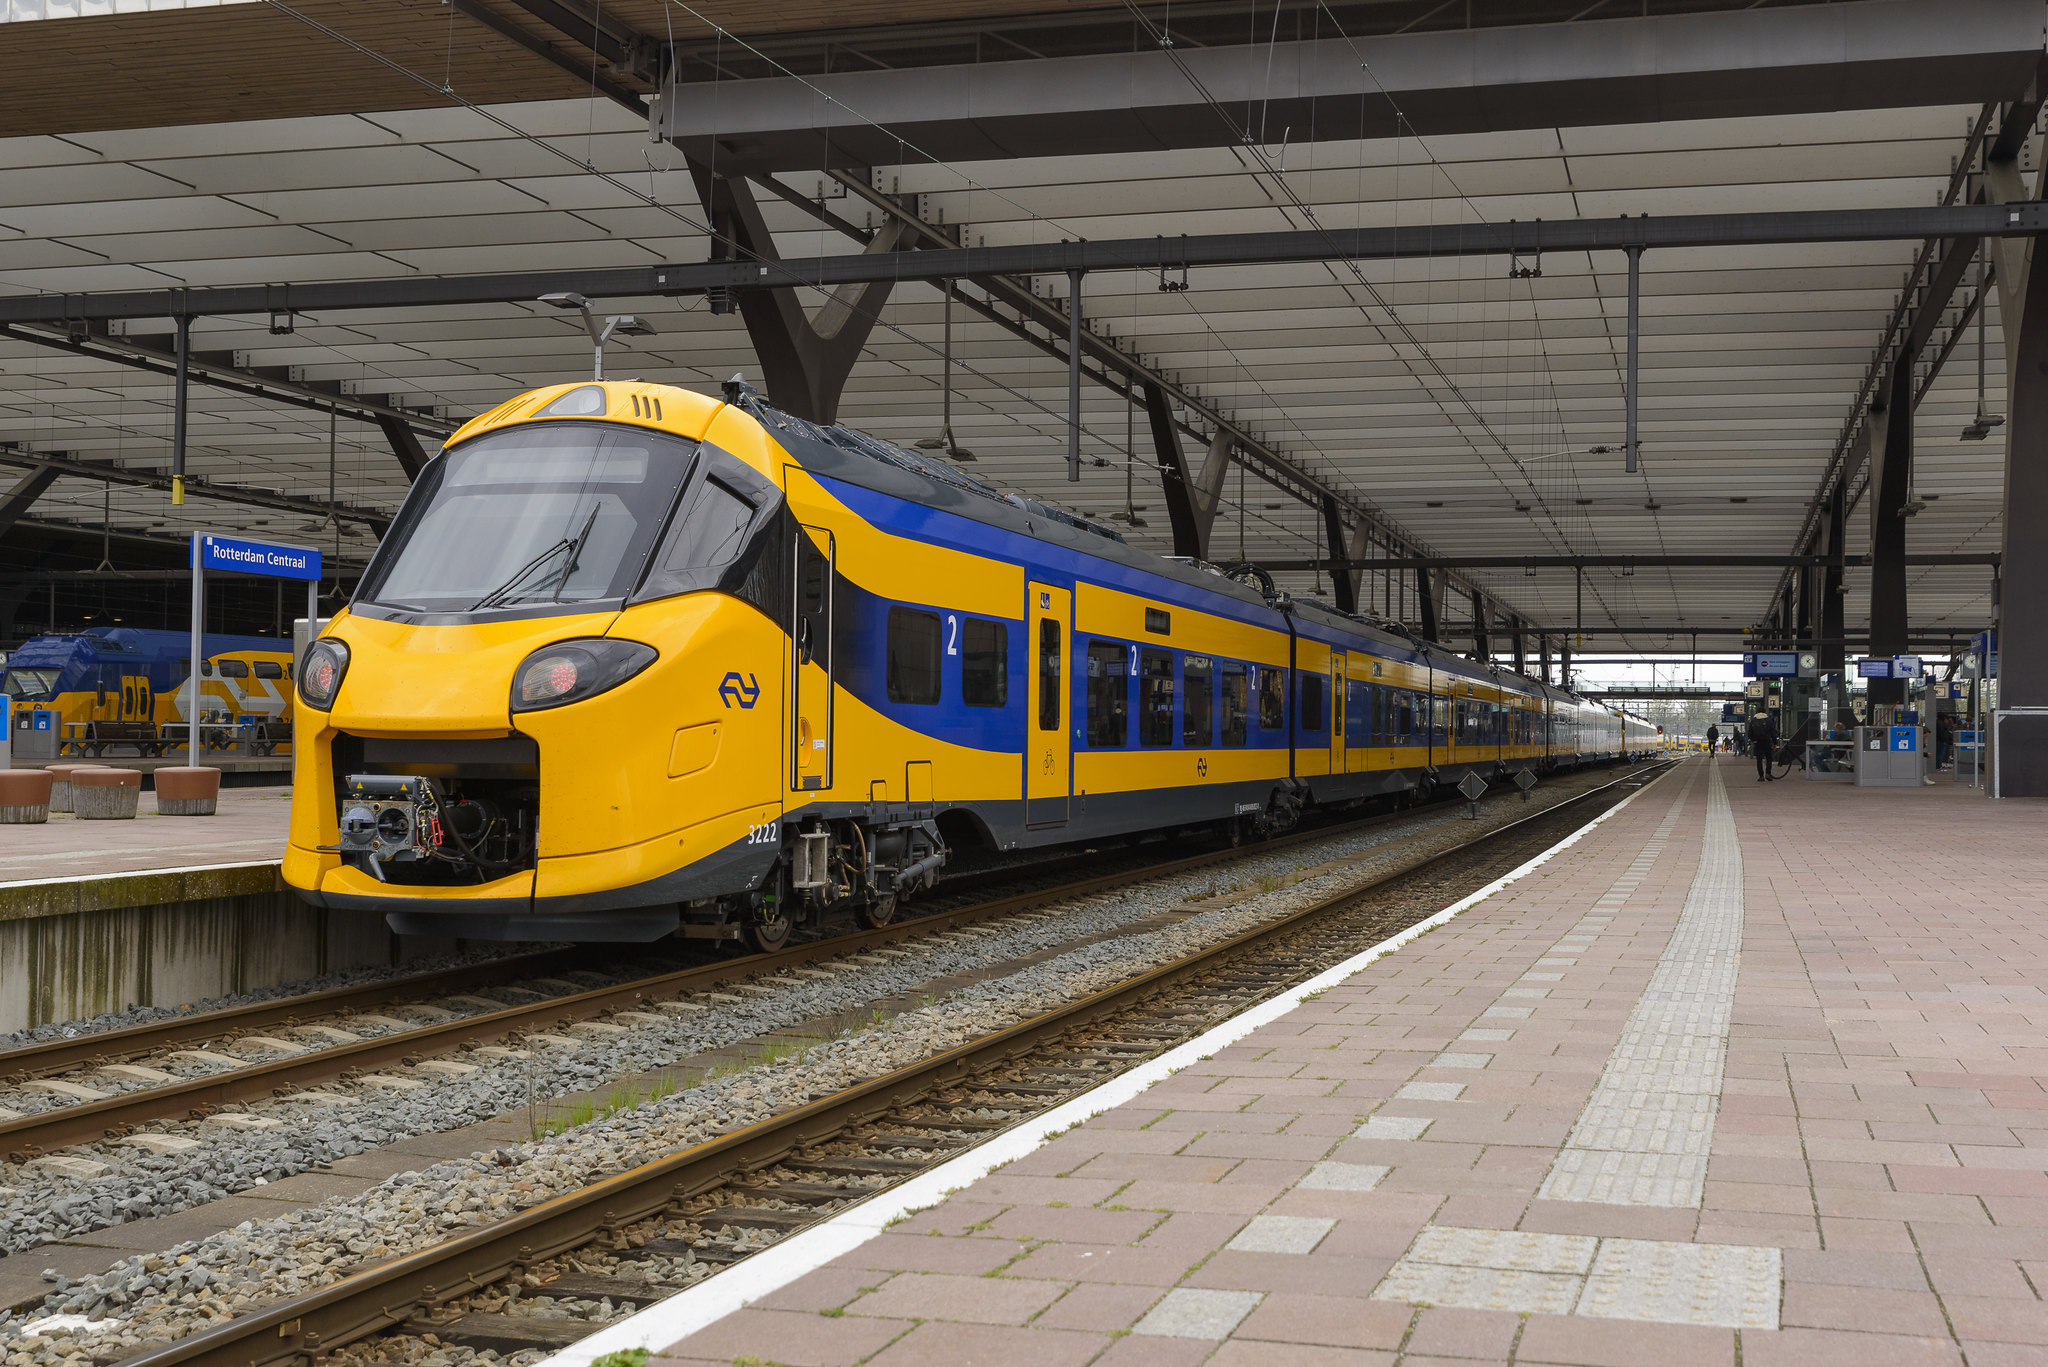 Alstom’s ICNG electric train on its first test run between Amsterdam and Rotterdam